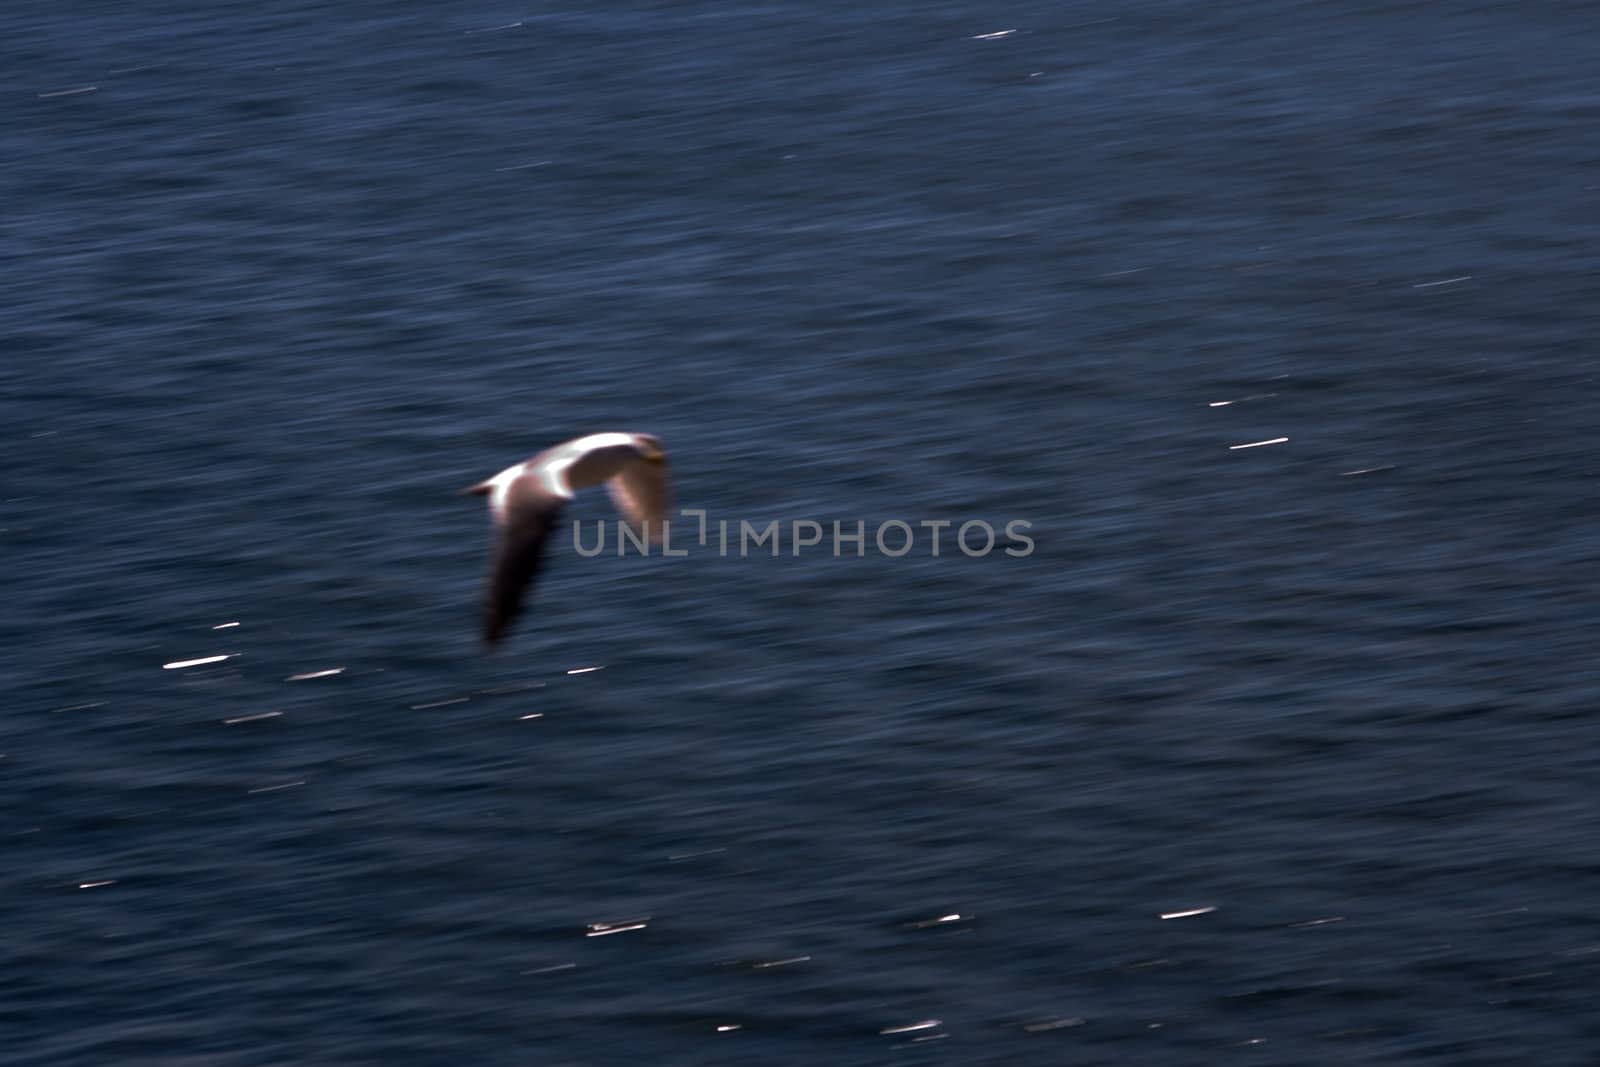 Seagull Flying over Ocean Fast was captured over the waters of Puget Sound at Seattle Washington. This blur represents the speed and motion of the bird in this abstract conceptual representation.
